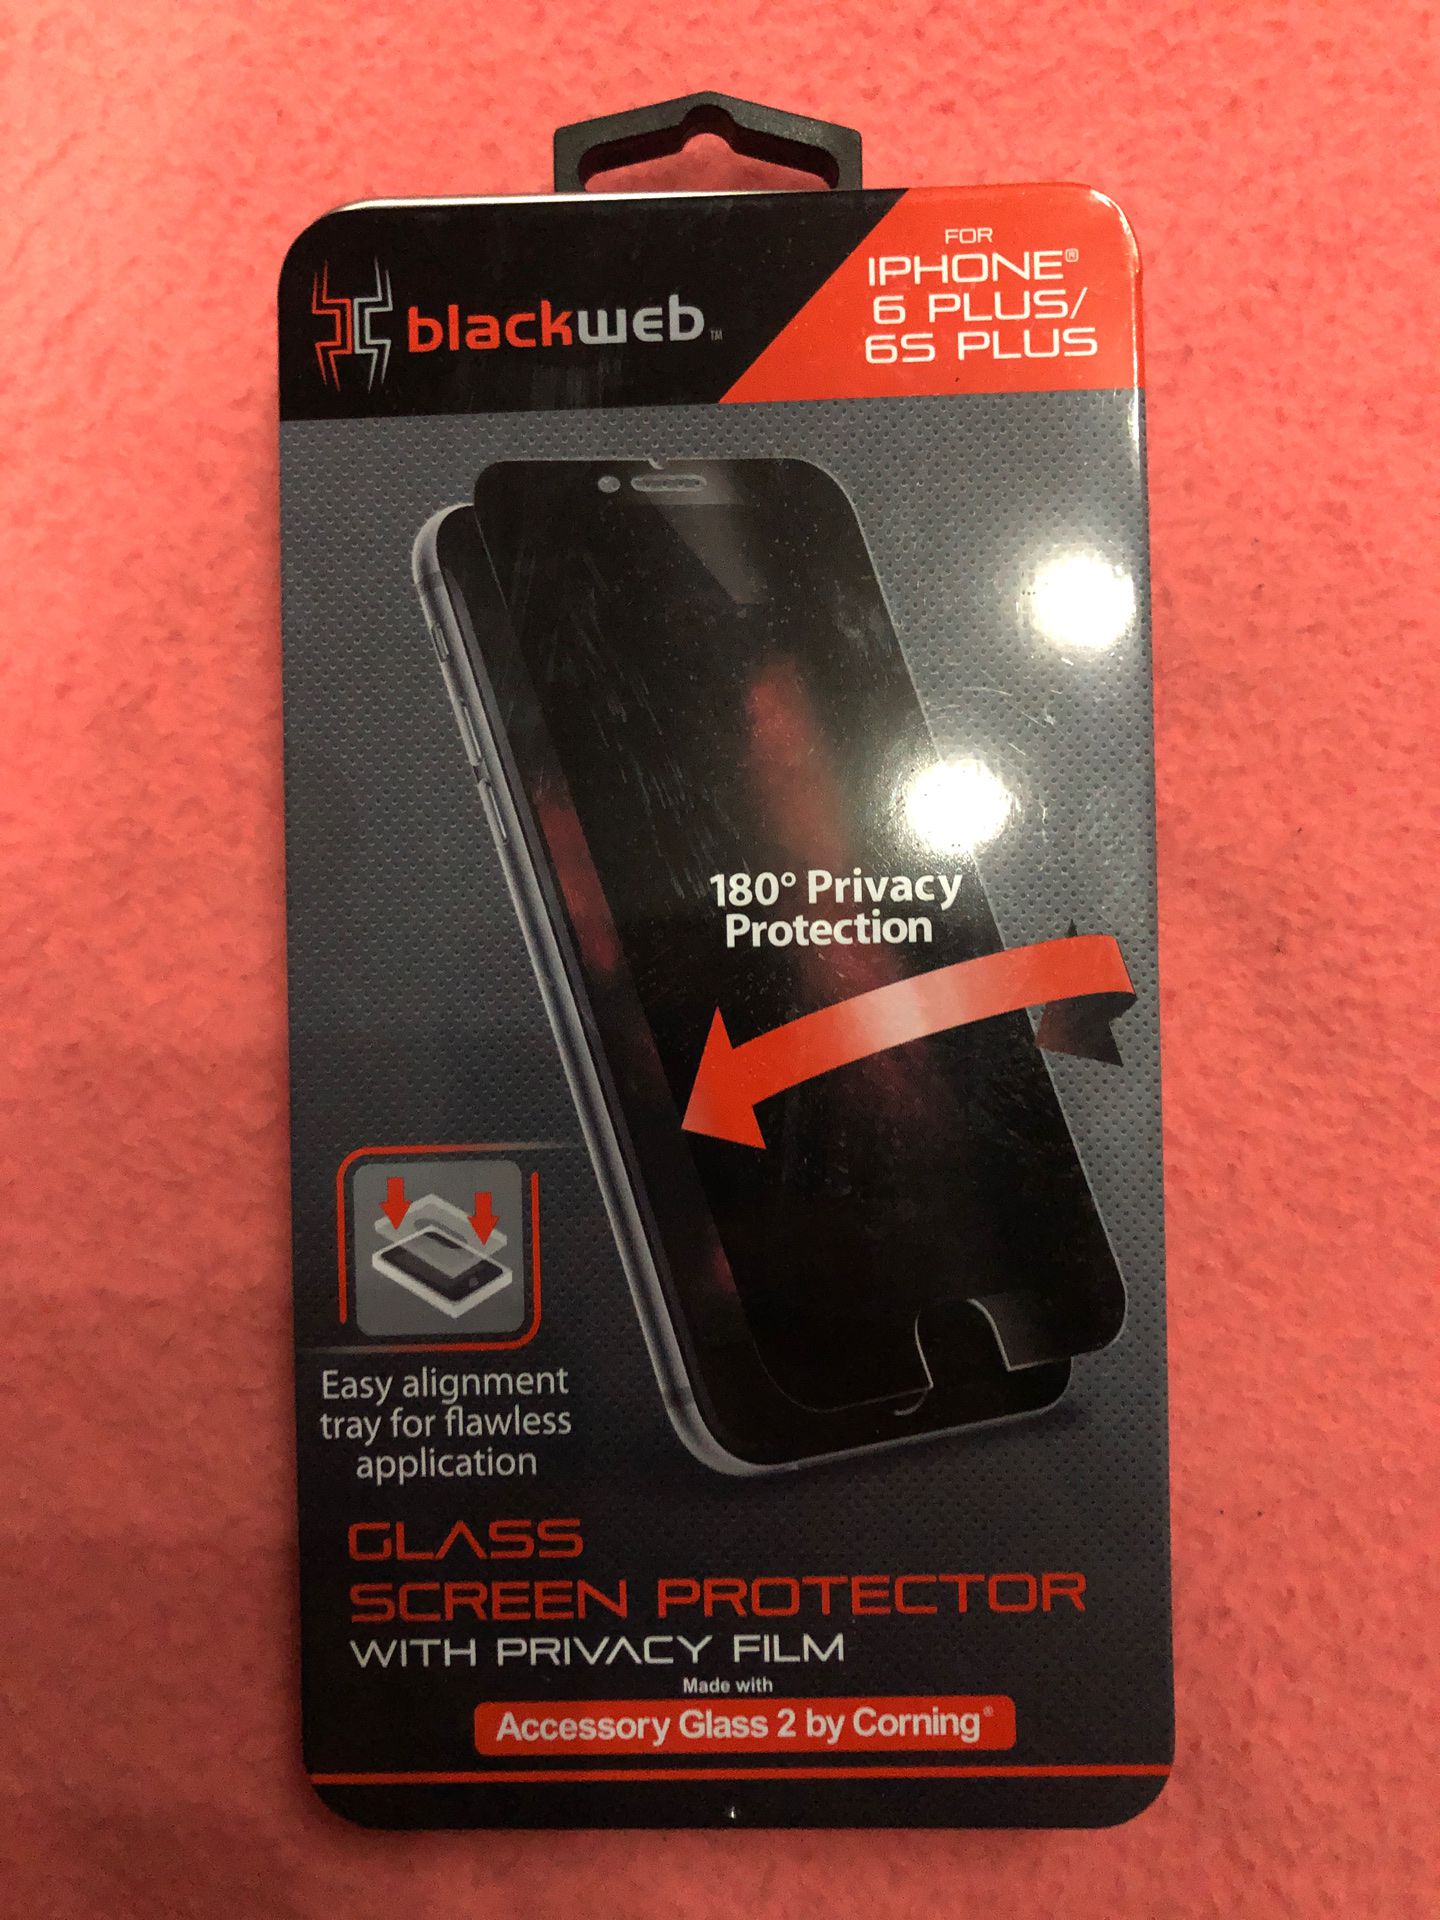 Glass screen protector with privacy film..iphone6 plus/ 6s plus NEW